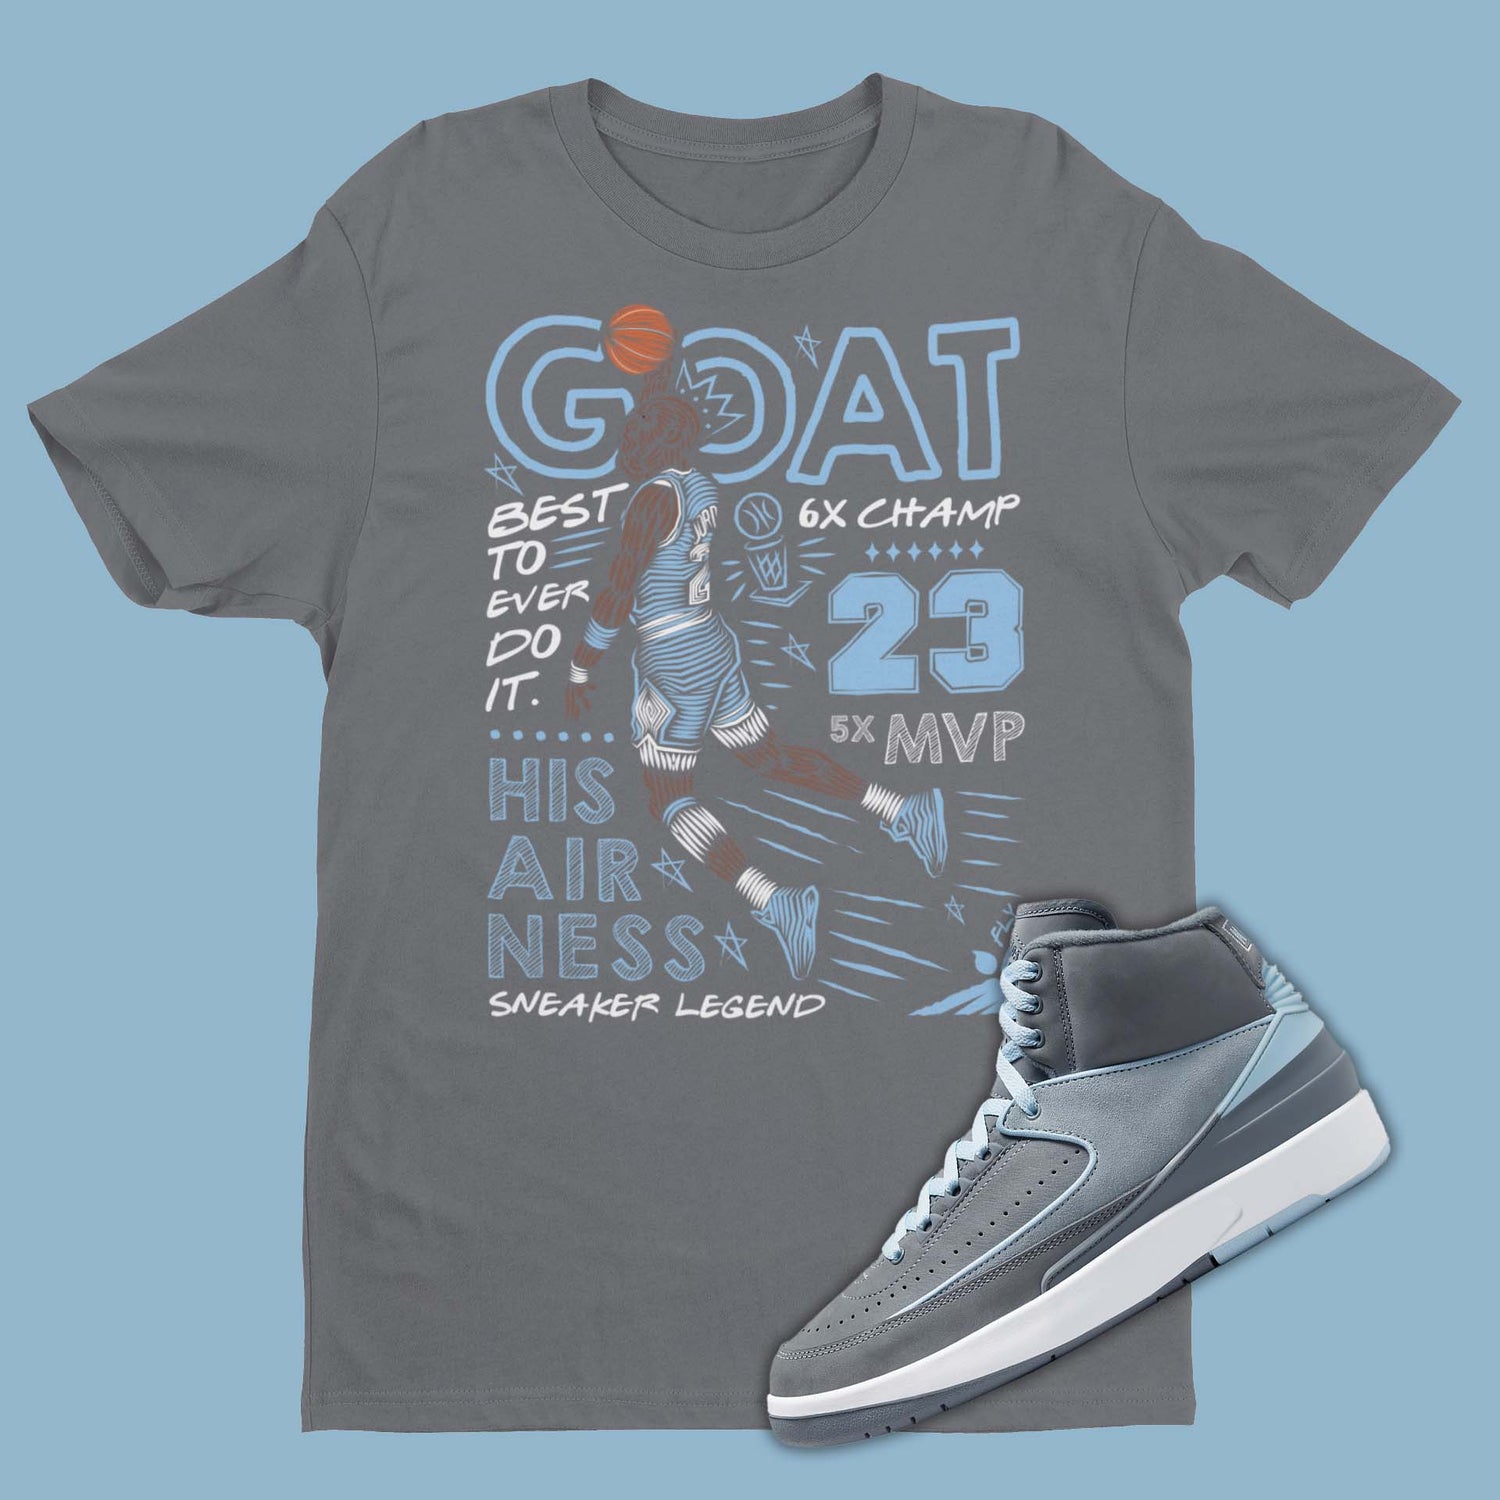 Grey t-shirt featuring a graphic of Michael Jordan dunking, designed to complement the sleek and stylish Air Jordan 2 Cool Grey sneakers